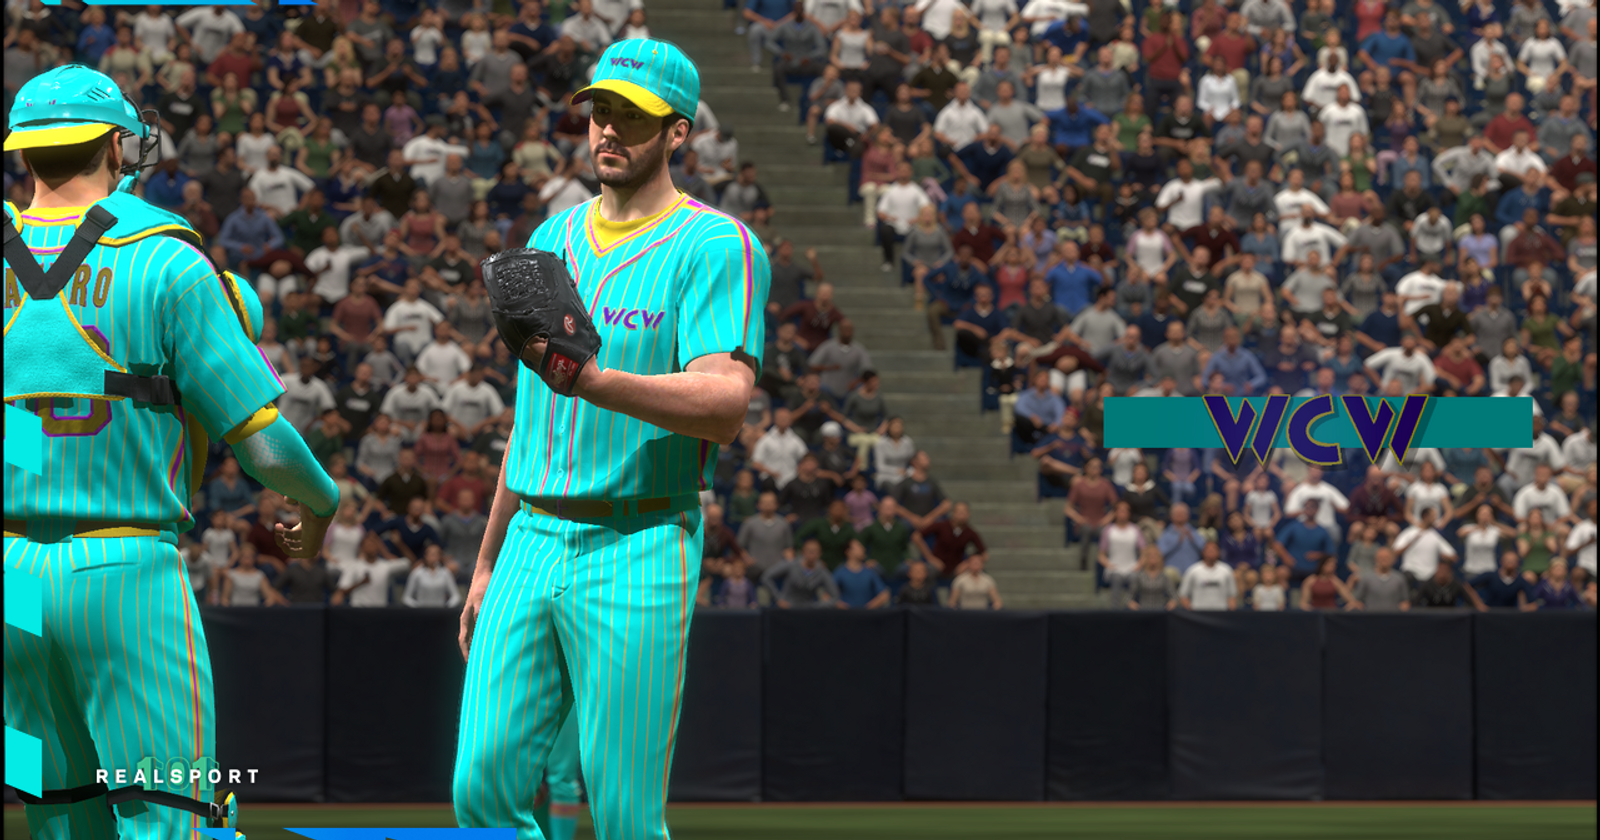 The Best Teams For Franchise Mode In MLB The Show 21